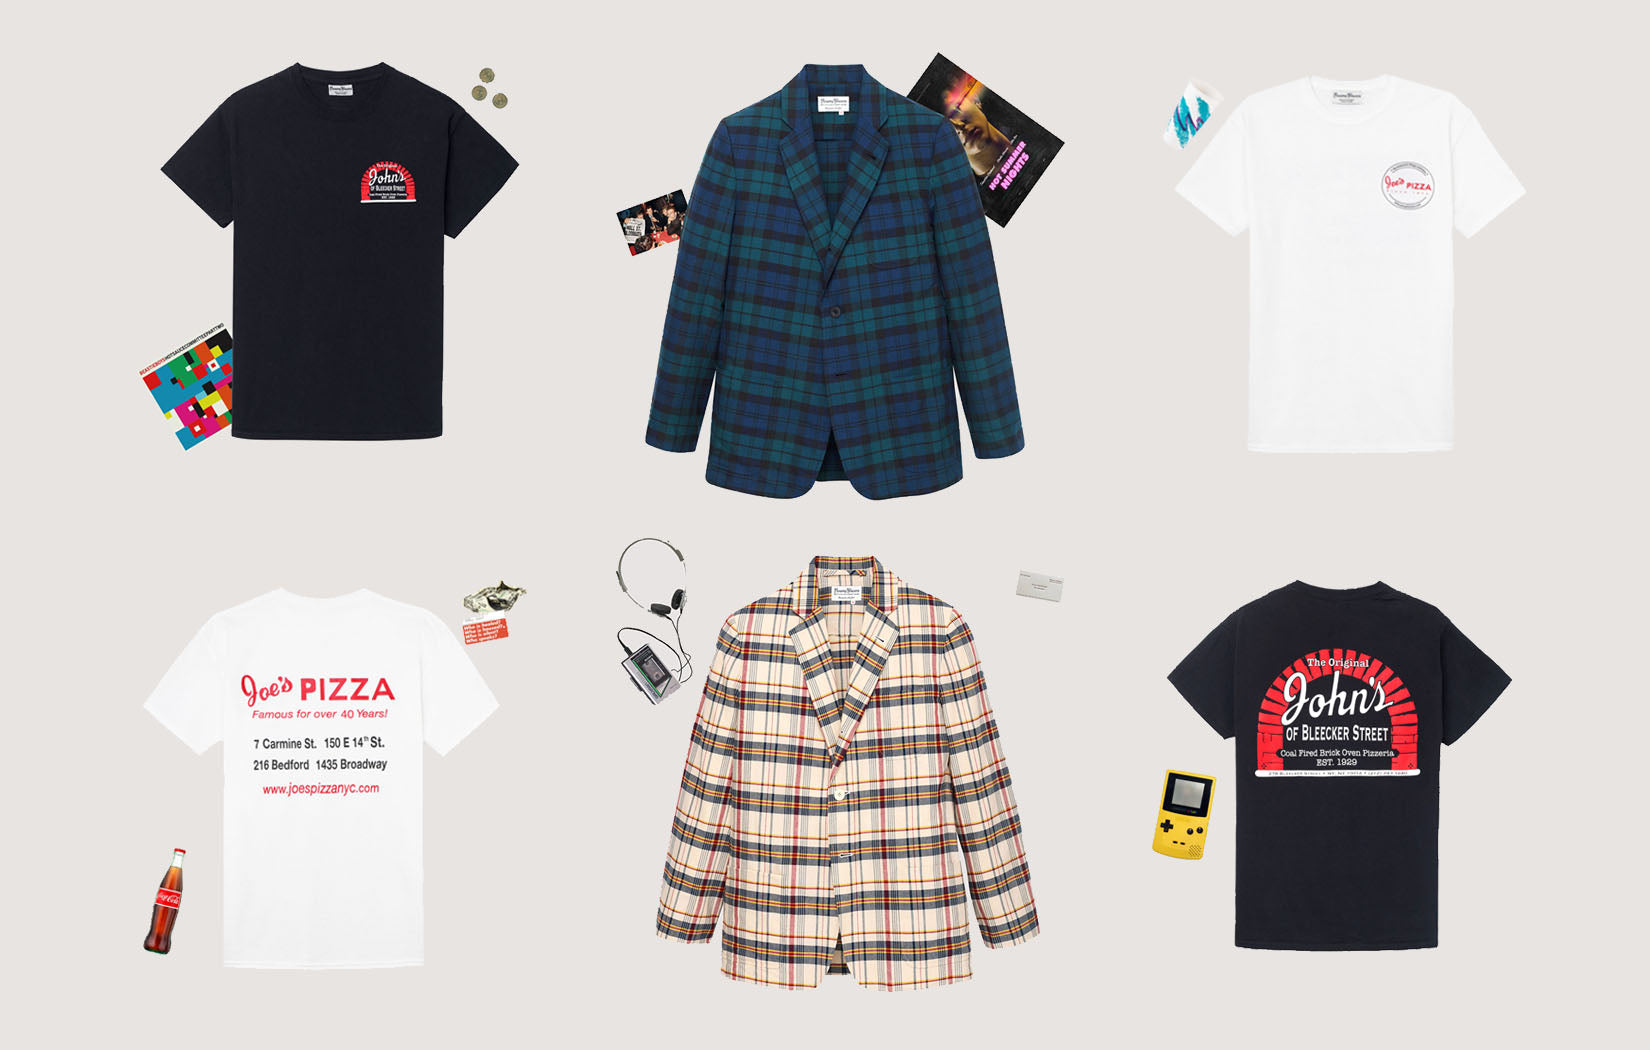 80's NYC Summer Vibes (Made-in-NYC madras jackets and classic NYC pizzeria merch)